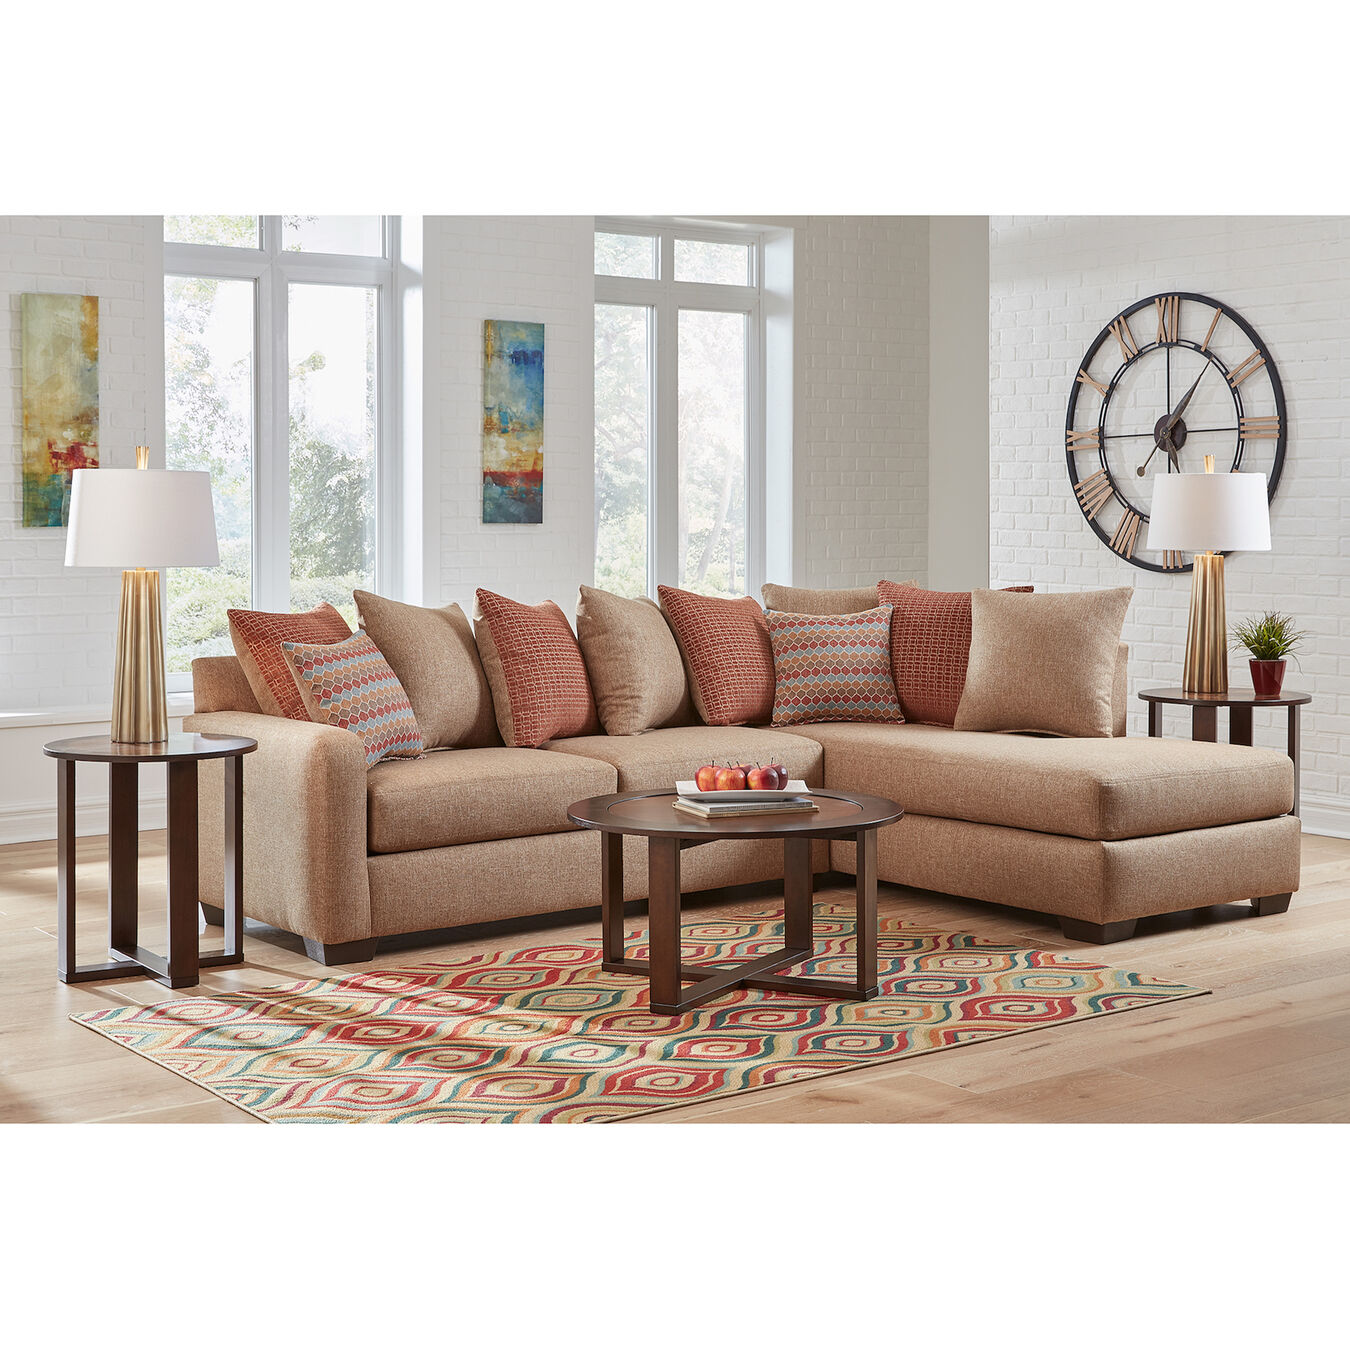 Woodhaven Industries Living Room Sets 7Piece Casablanca Living Room
Collection